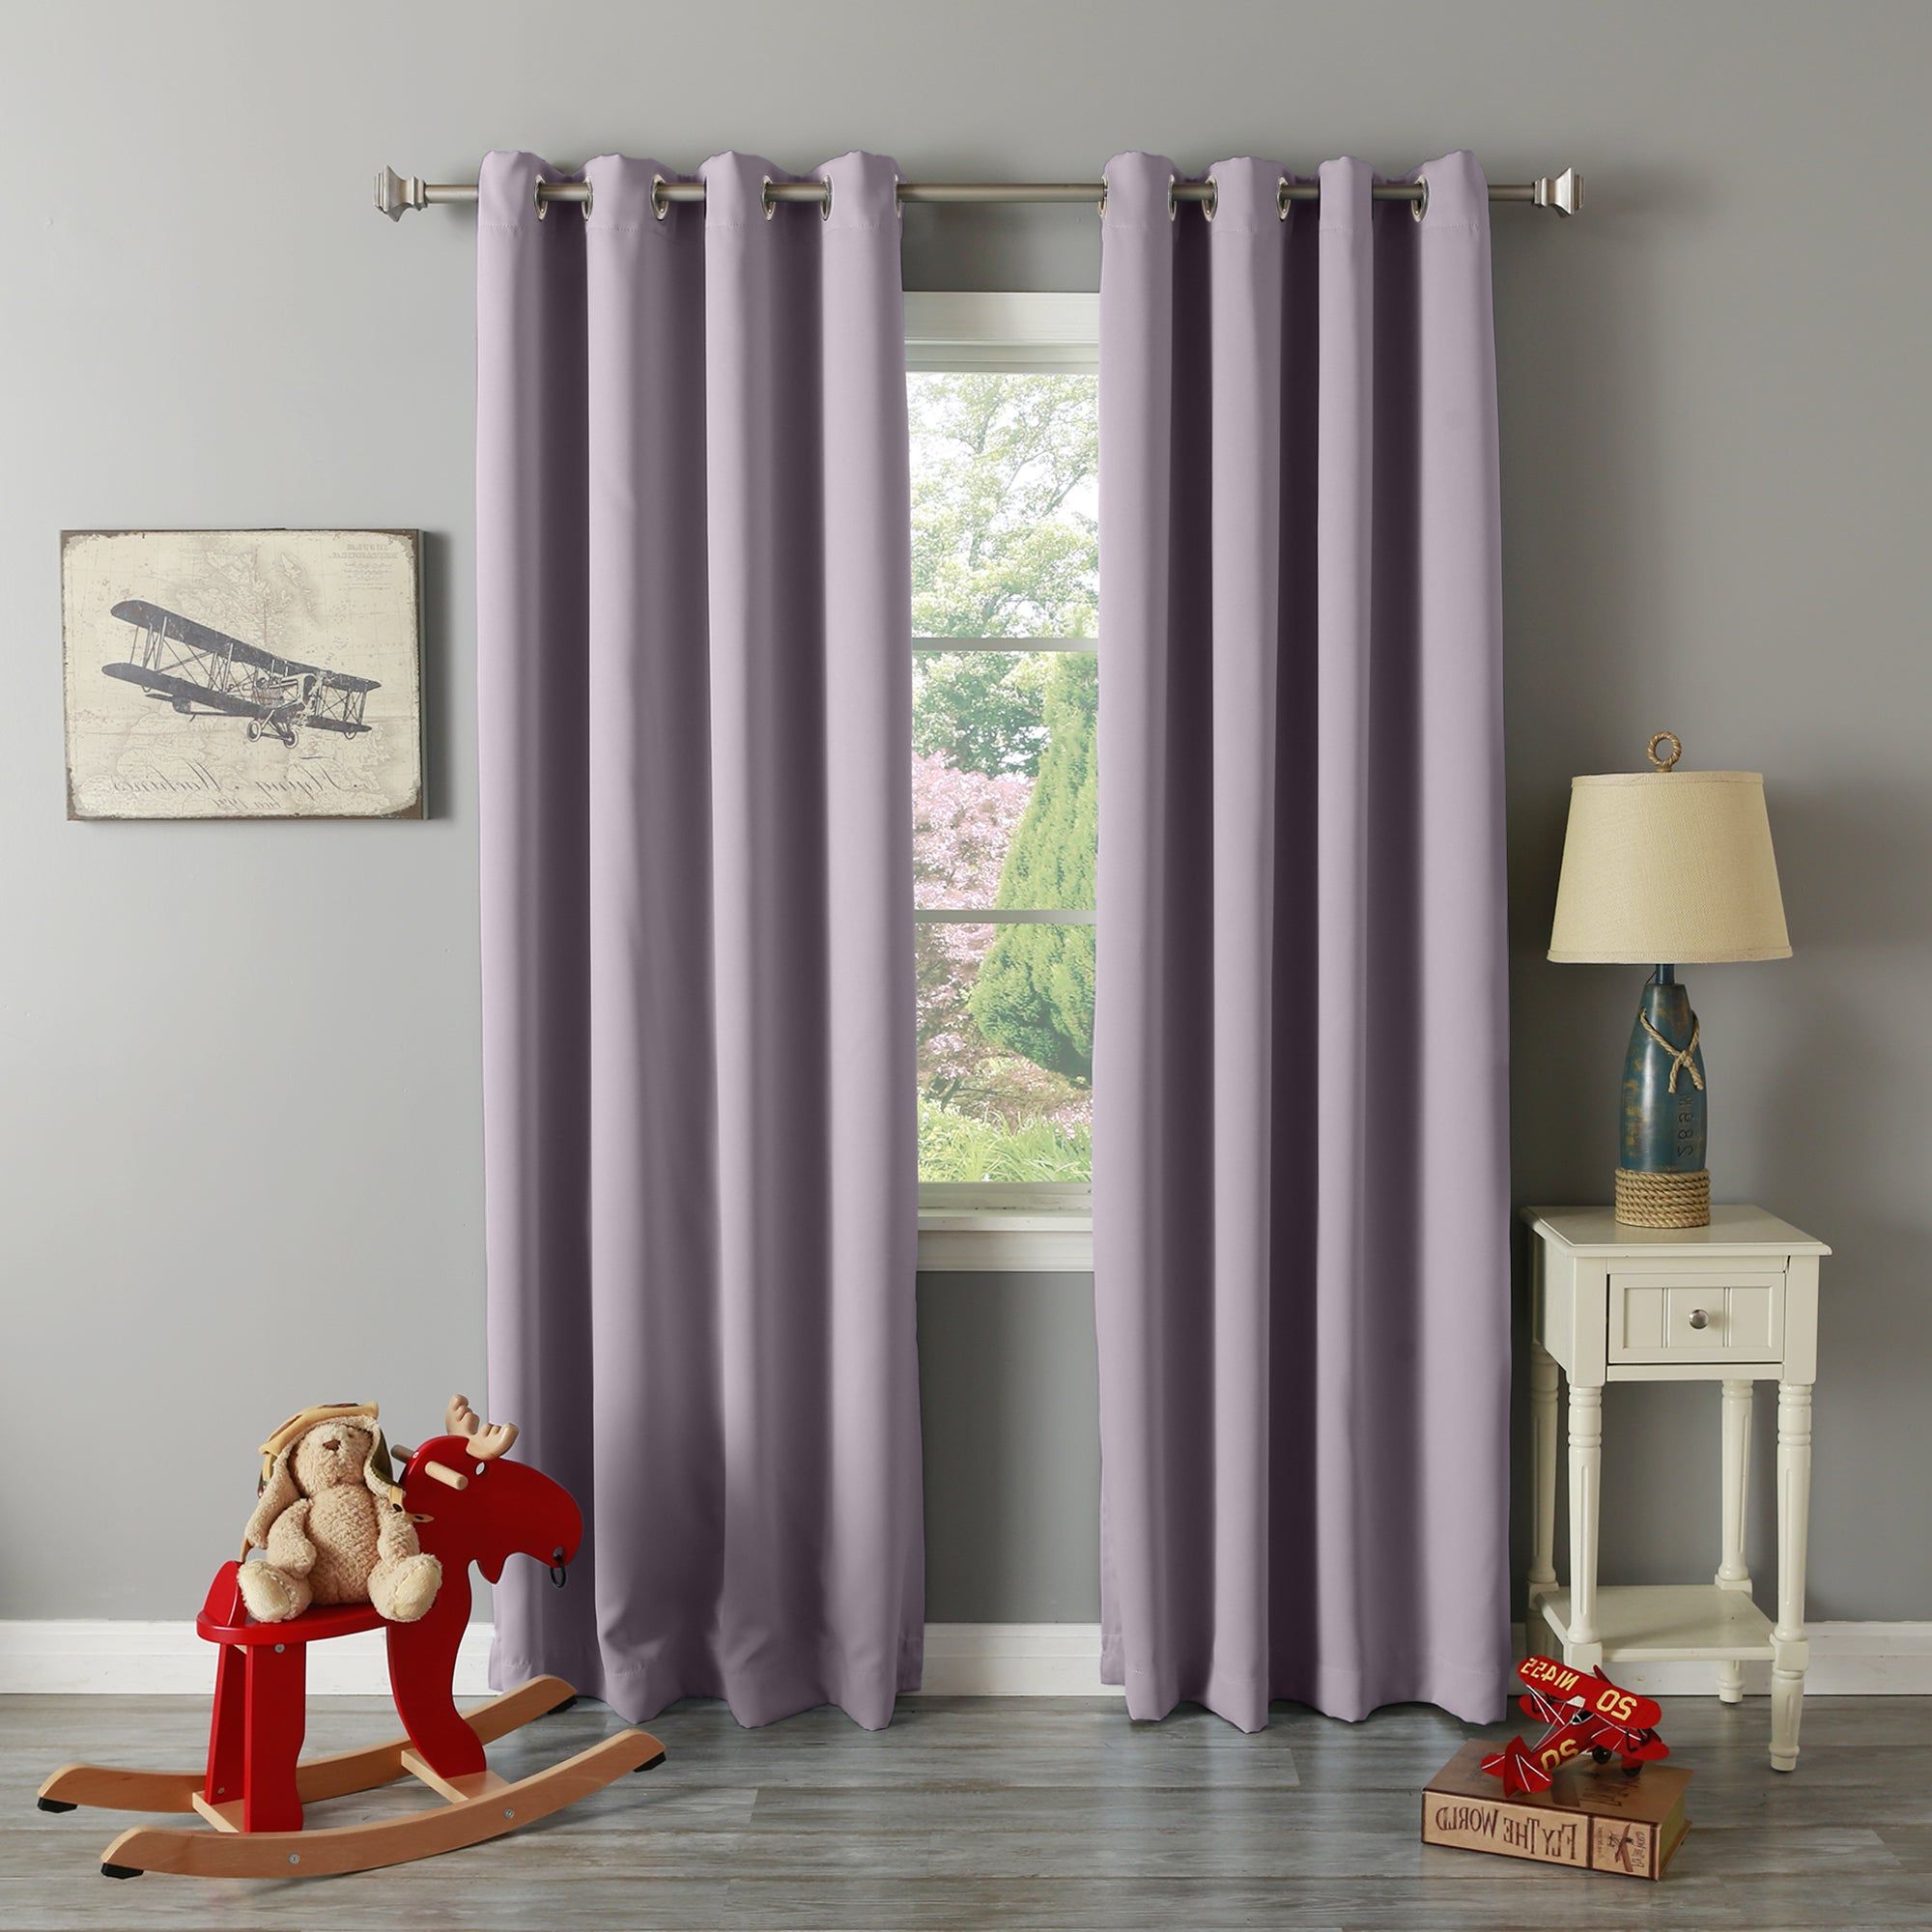 Silvertone Grommet Thermal Insulated Blackout Curtain Panel Pairs Intended For Most Up To Date Details About Aurora Home Silver Grommet Top Thermal Blackout Curtain (View 15 of 20)